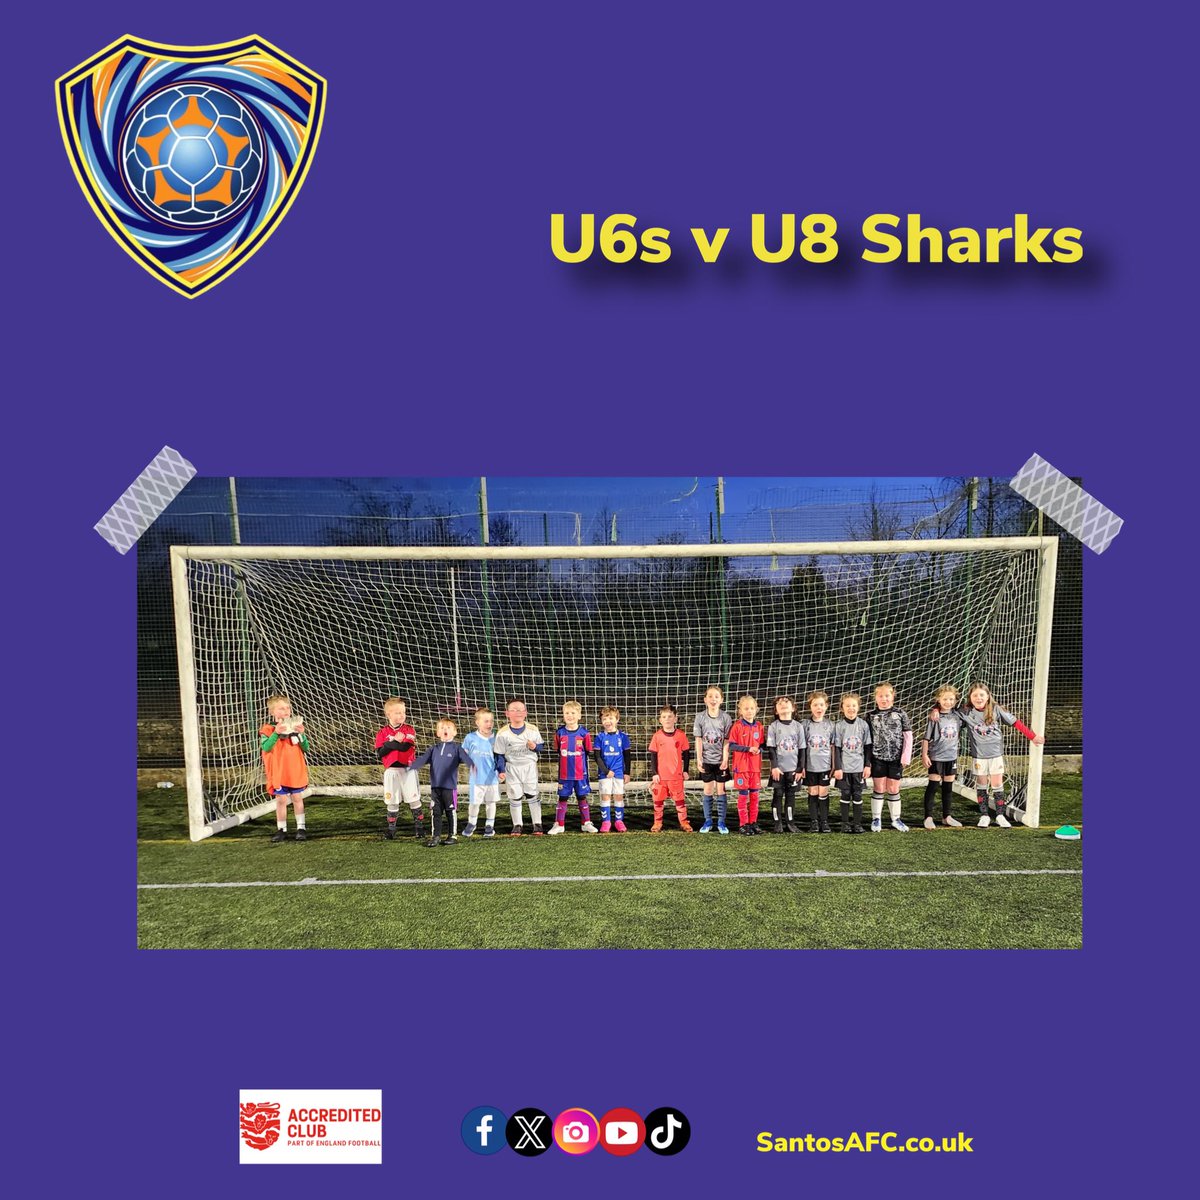 Yesterday our newly formed U6s and our brand new U8s Sharks played a friendly against each other, encouraging their development, building up their skills and supporting their teamwork!

#SantosAfc #SantosYouth #SantosU6s #u6s #u8s #u8ssharks #hergametoo #football #localfootball